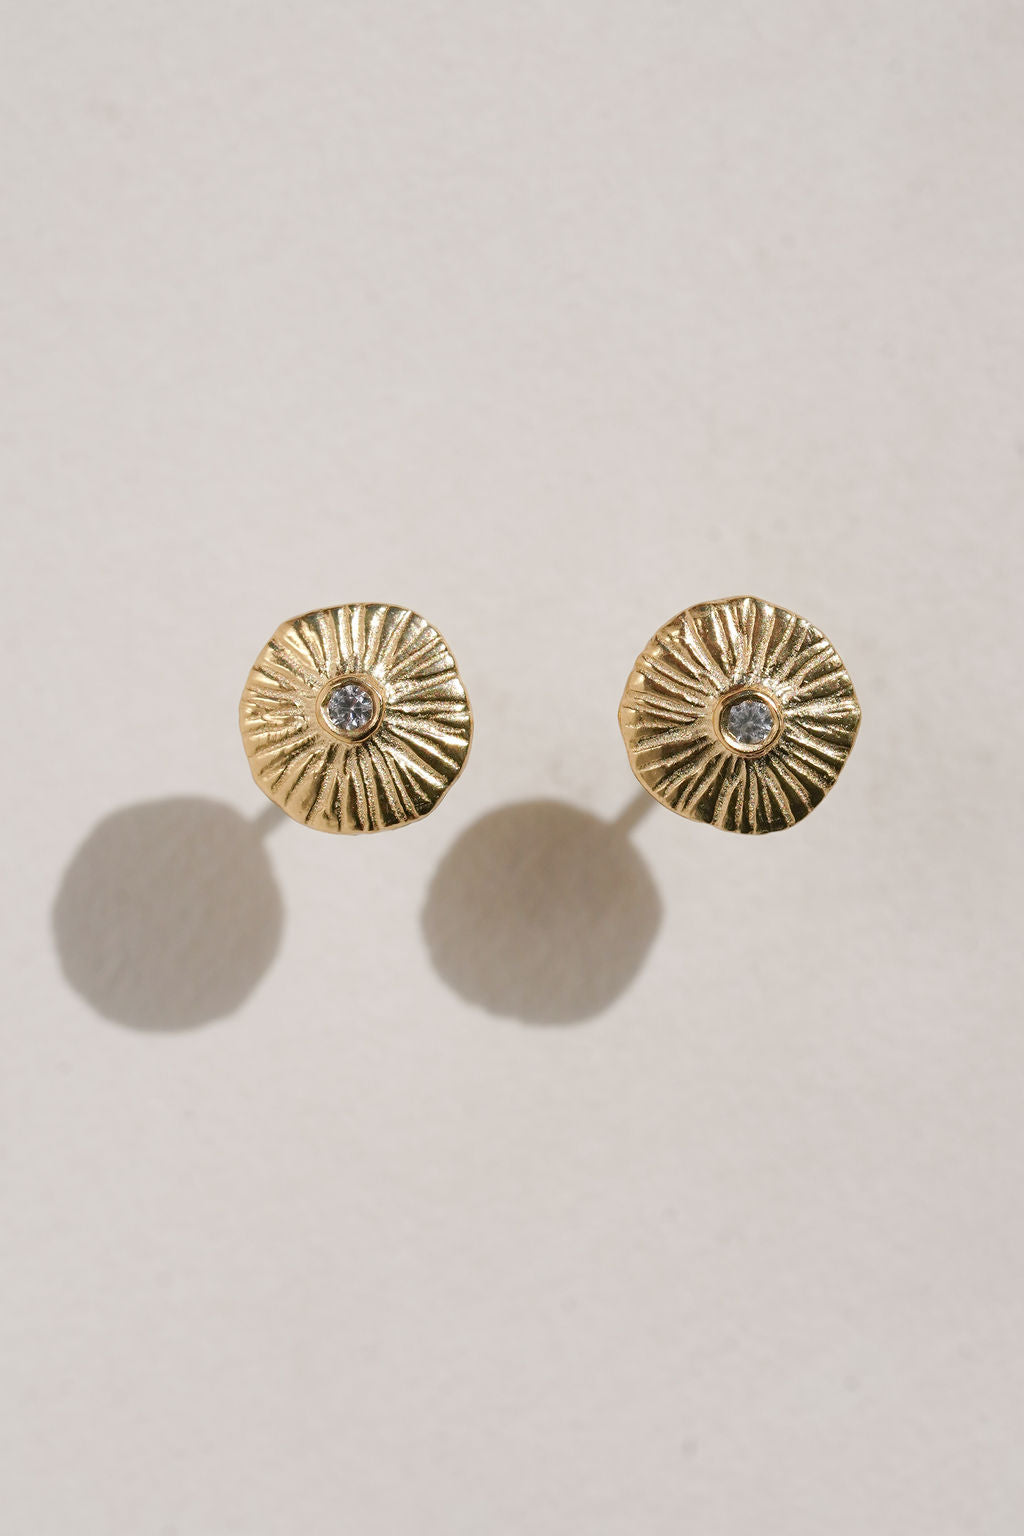 Aster Studs - Solid 14K Gold